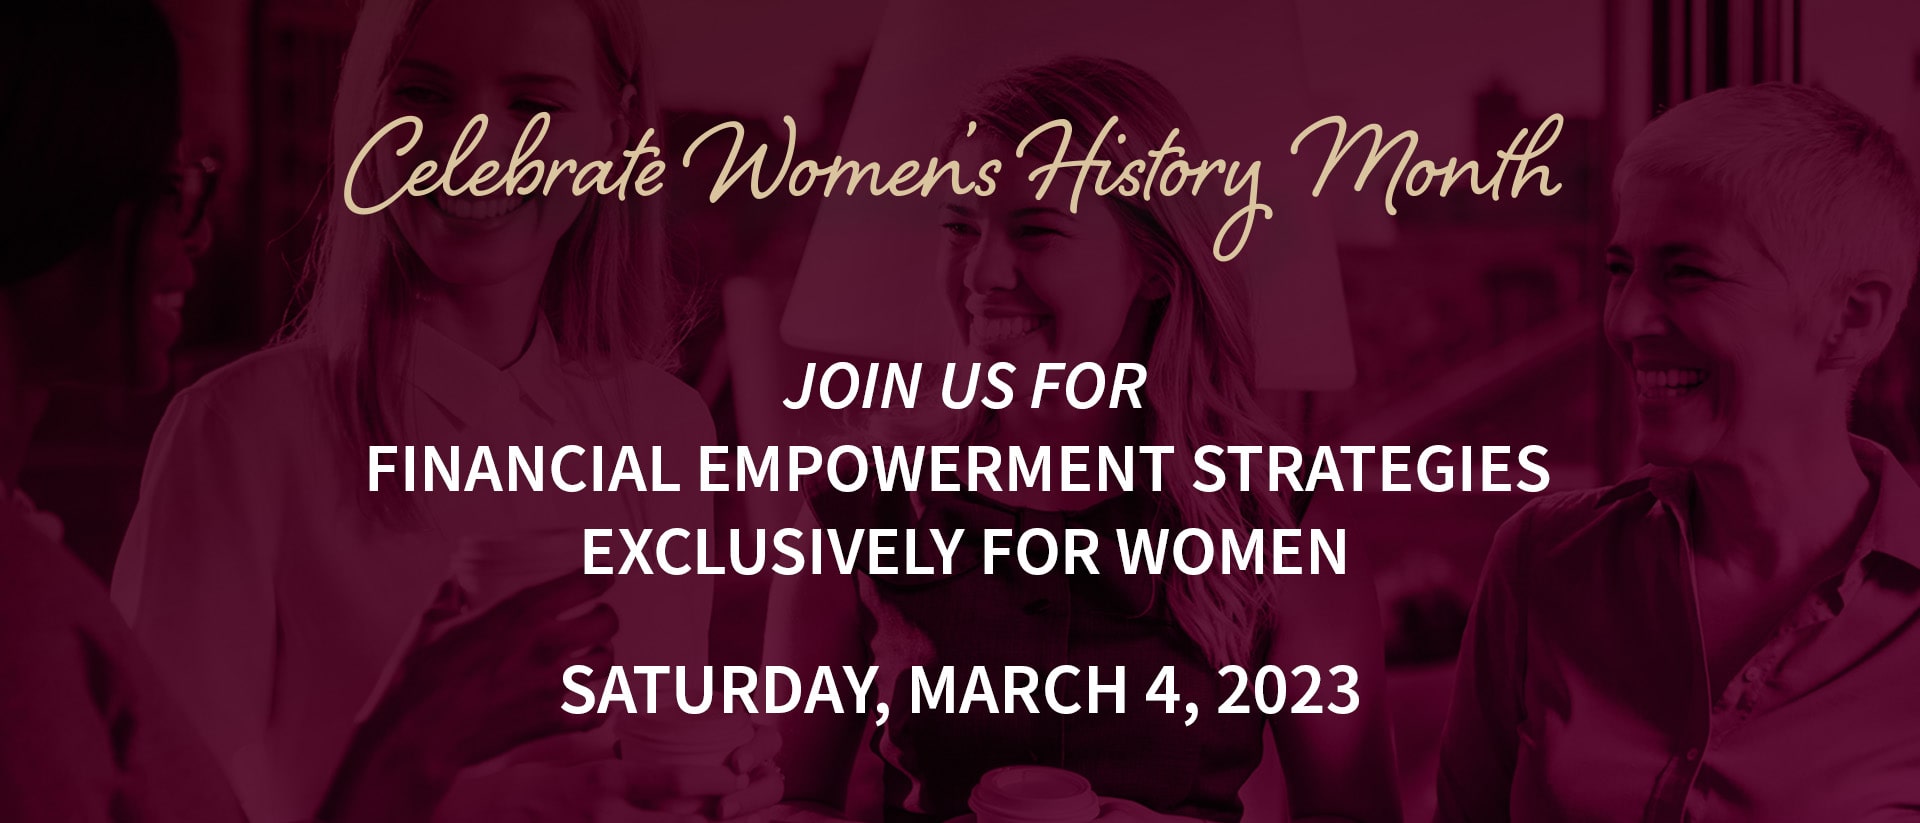 Join Us for Financial Empowerment Strategies Exclusively for Women